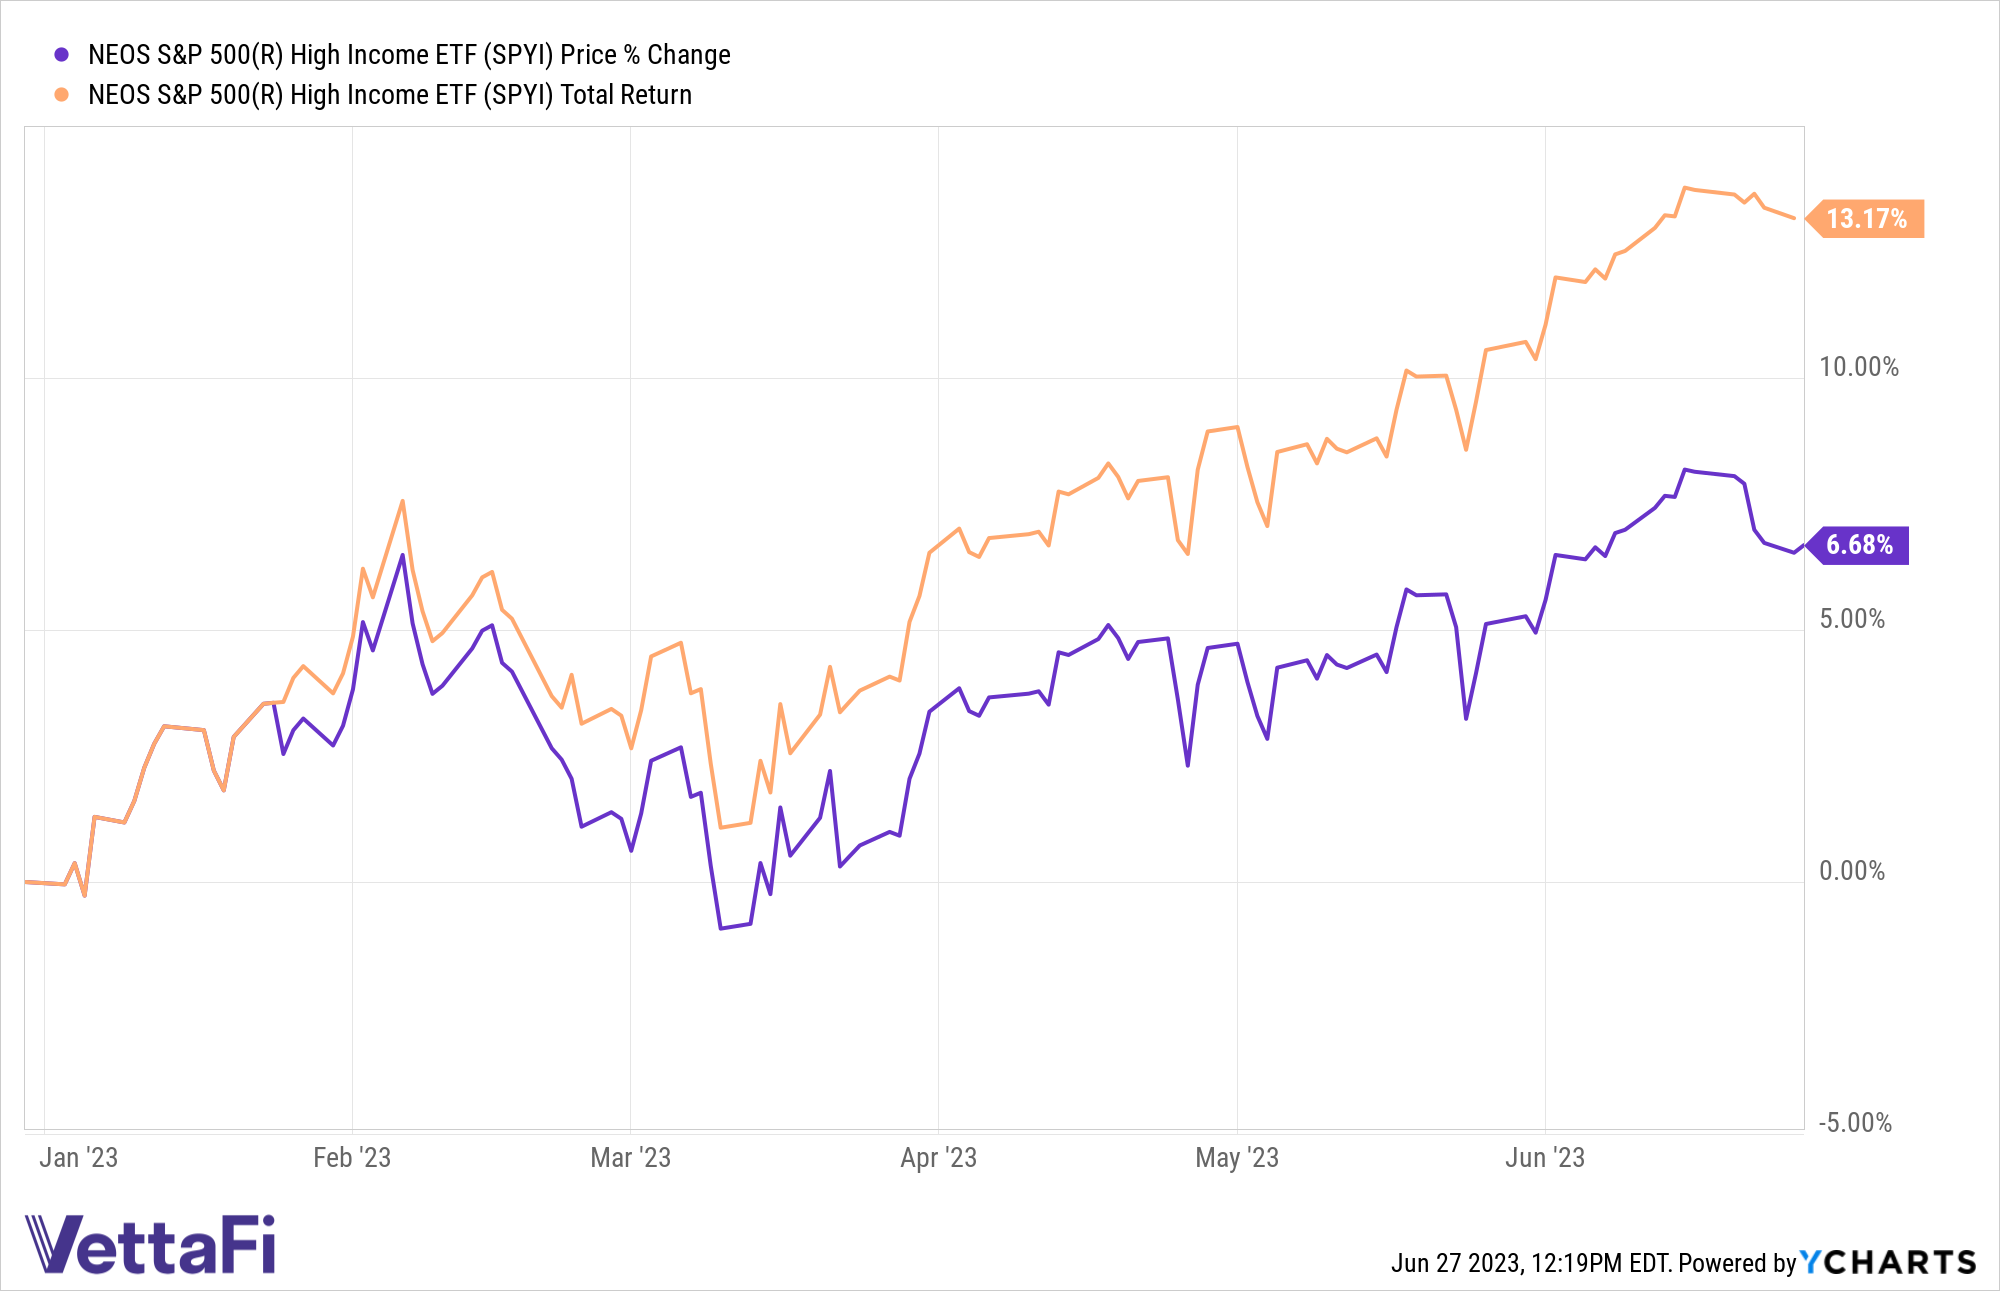 Chart of SPYI's price performance and total returns YTD